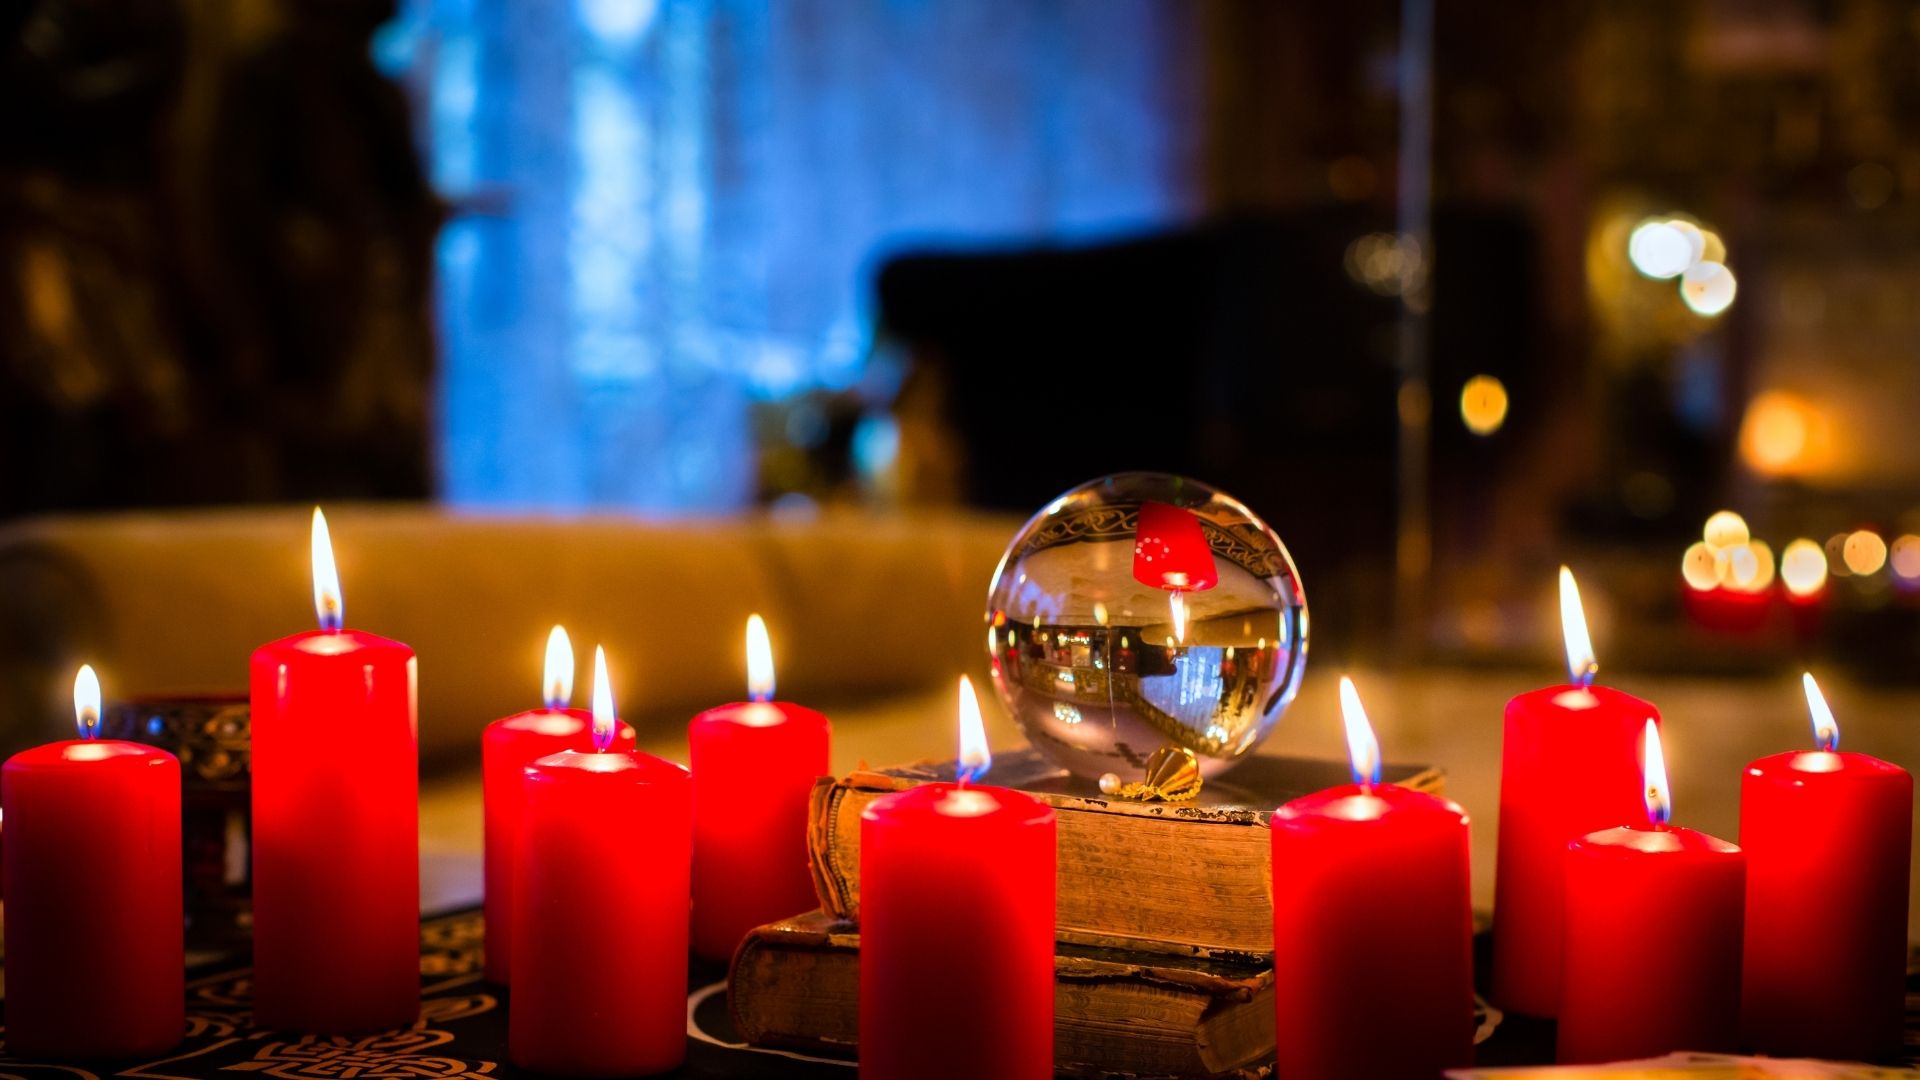 Lit red candles and a crystal ball on top of books